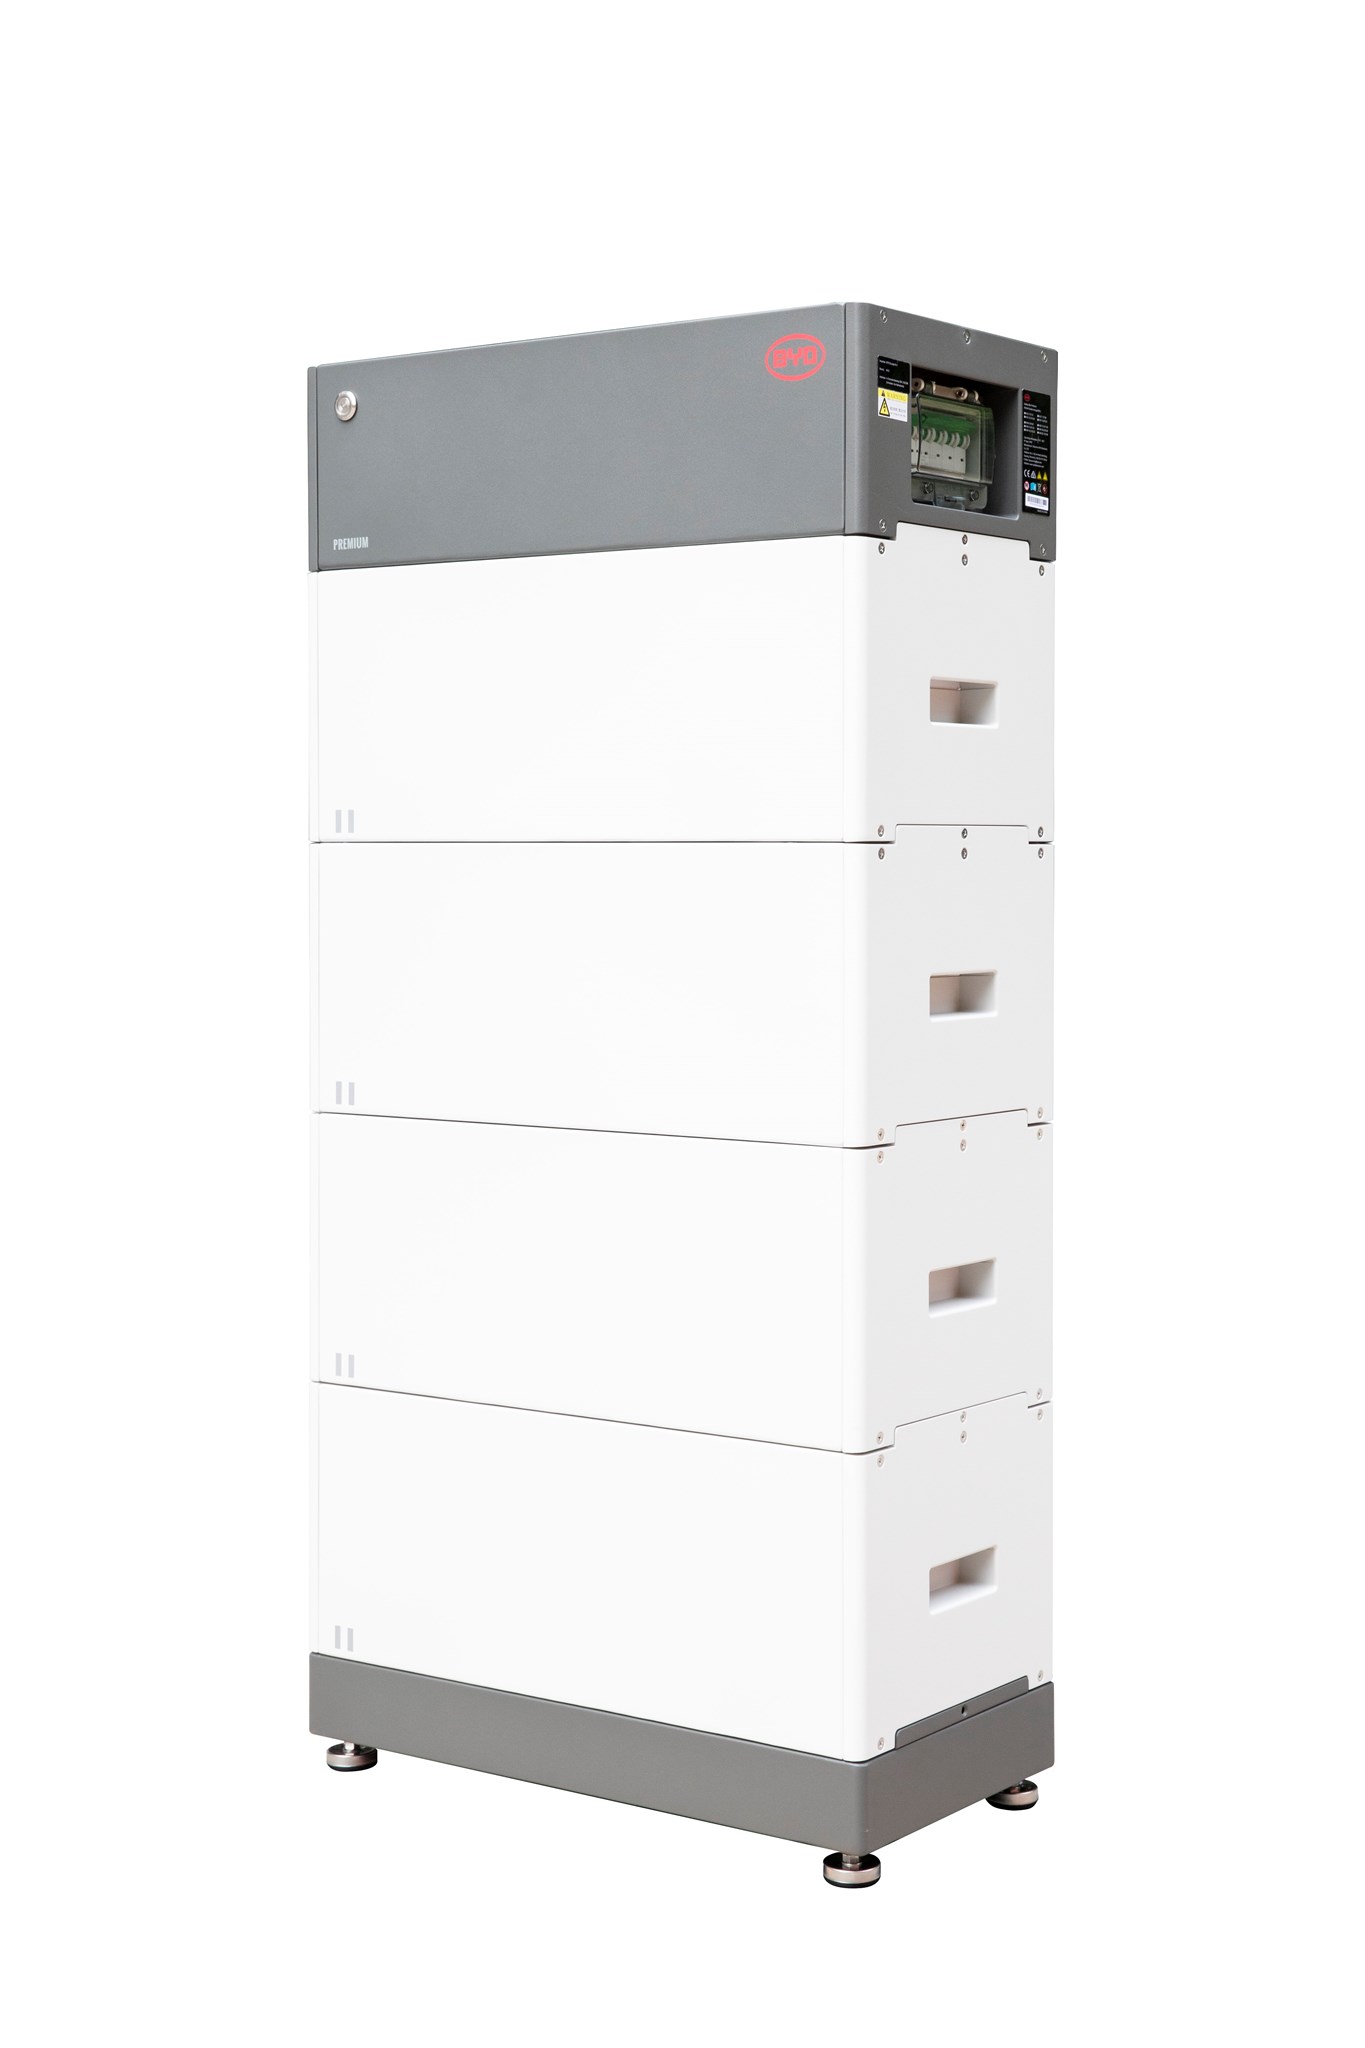 Picture of BYD Battery-Box Premium LVS 16.0 - 16 kW 4 x 4 kW/h (PV battery storage)